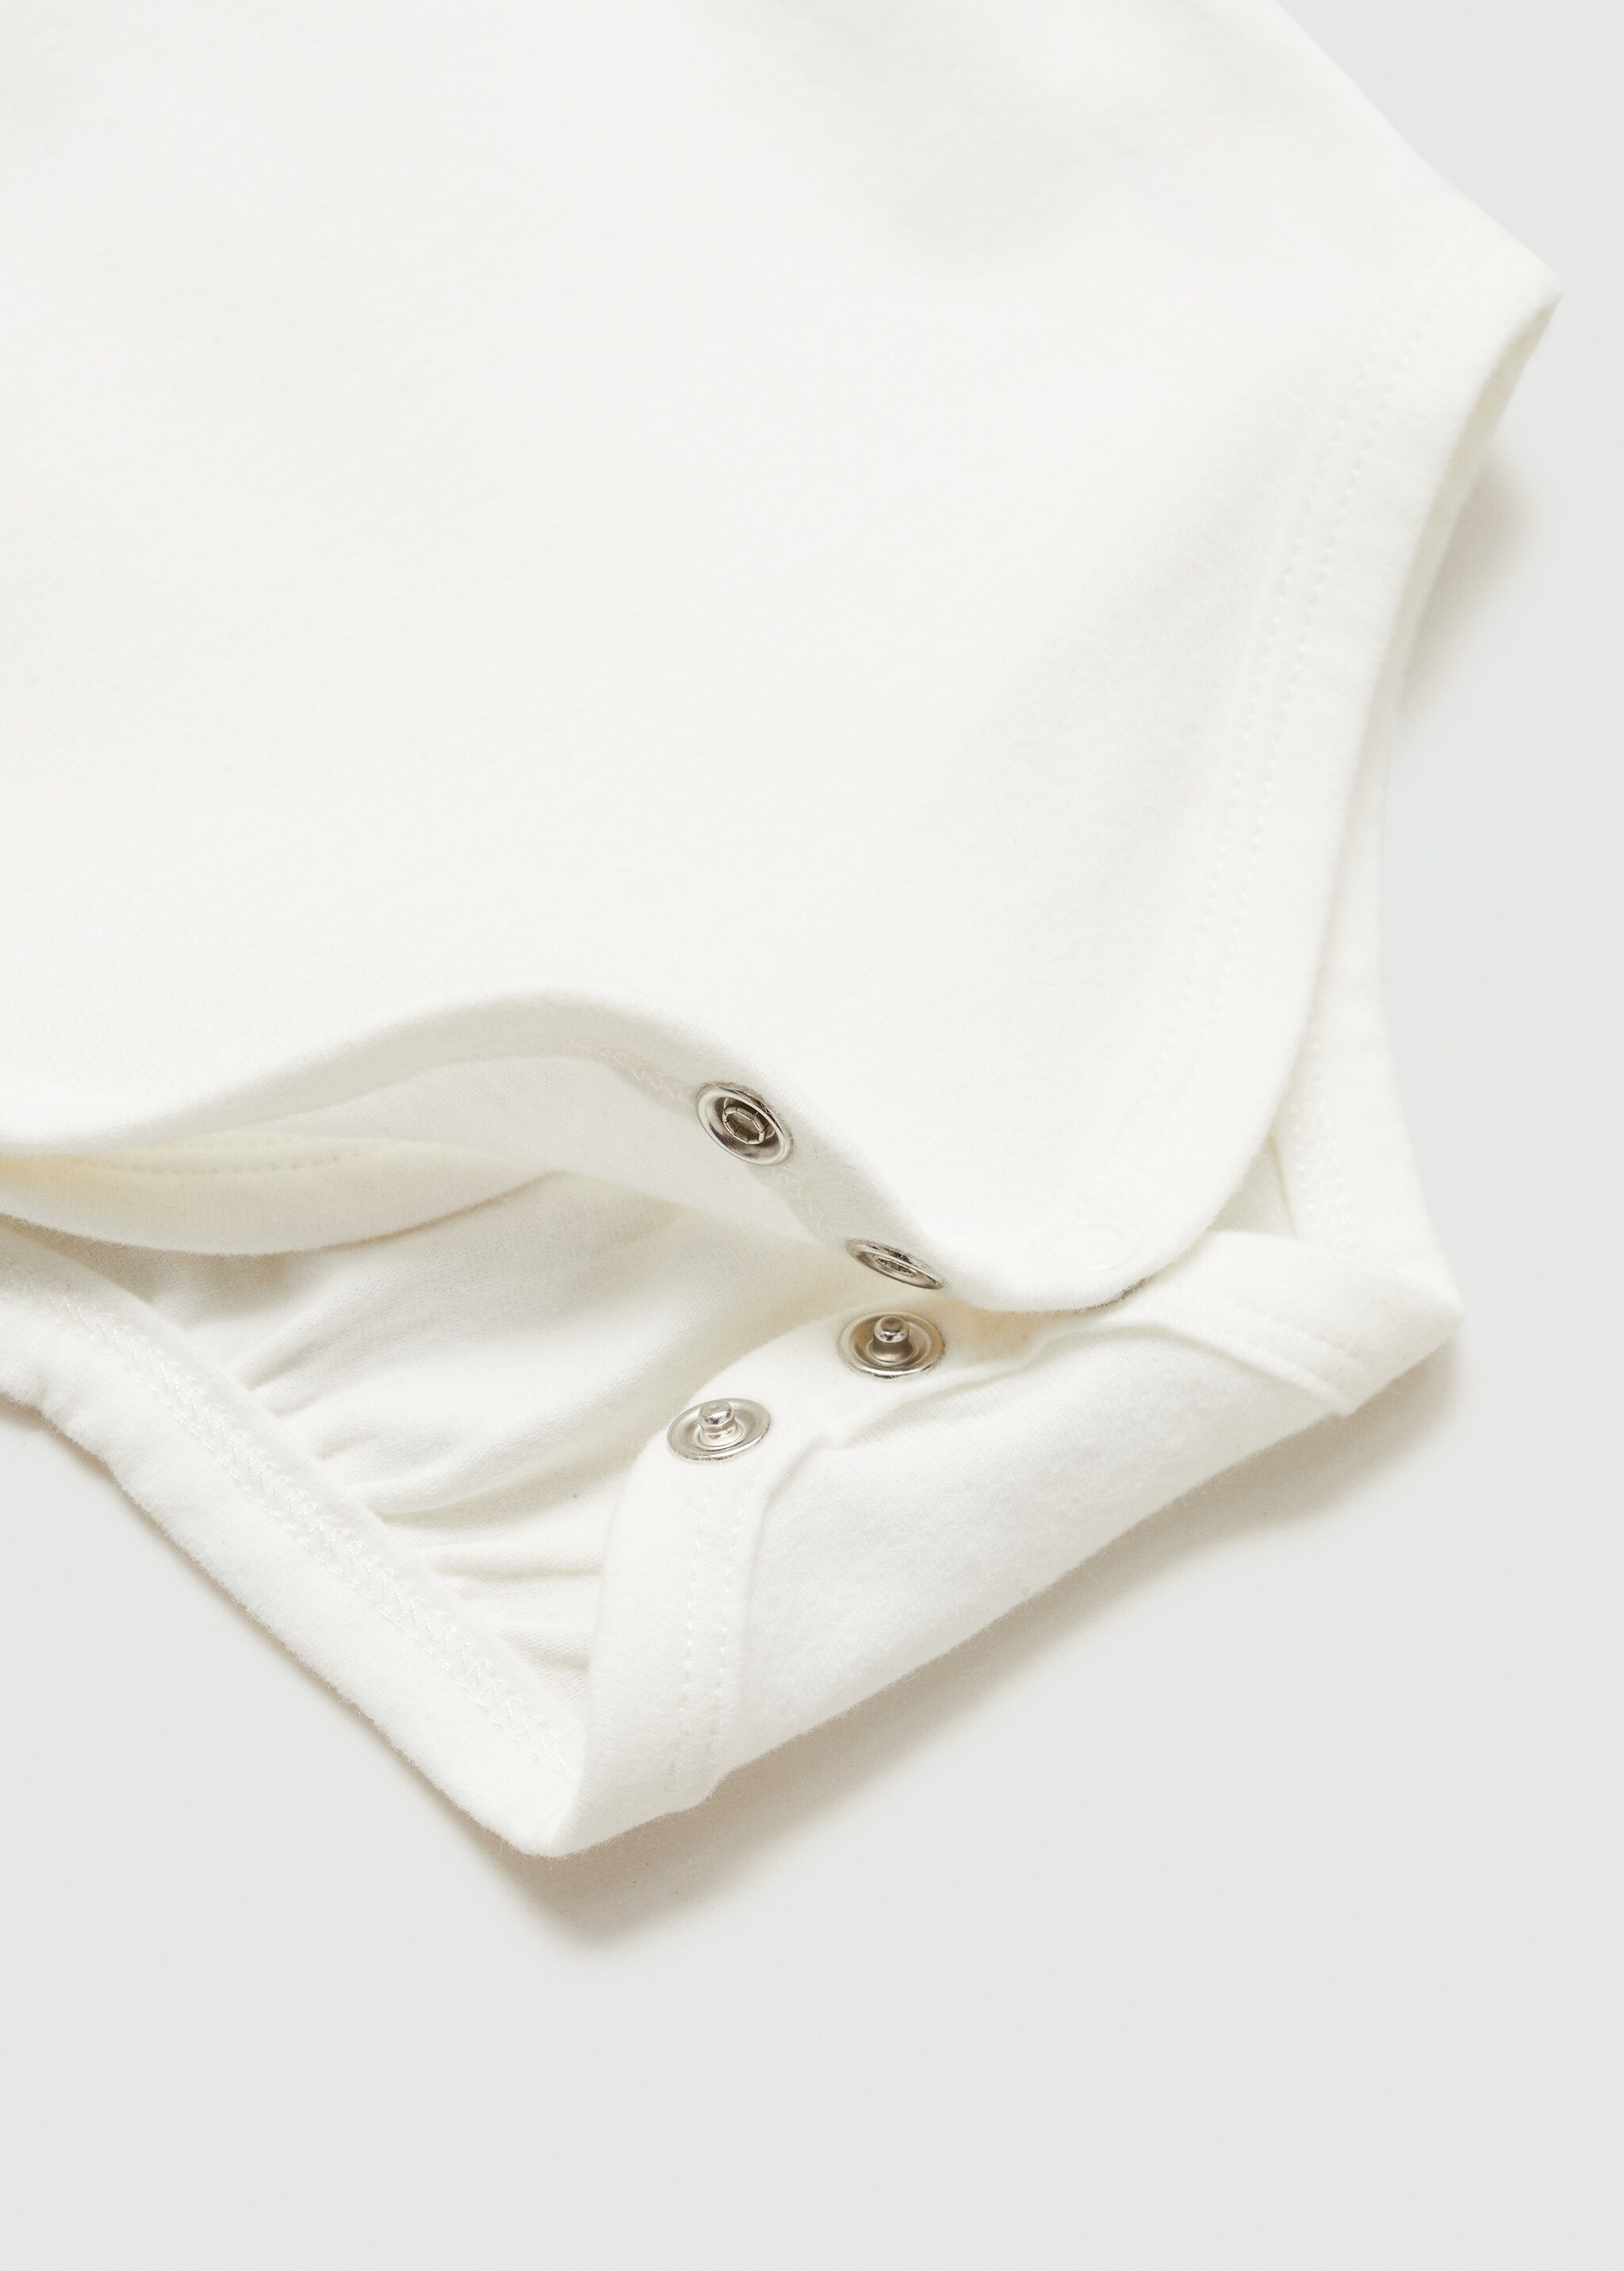 Cotton body - Details of the article 8